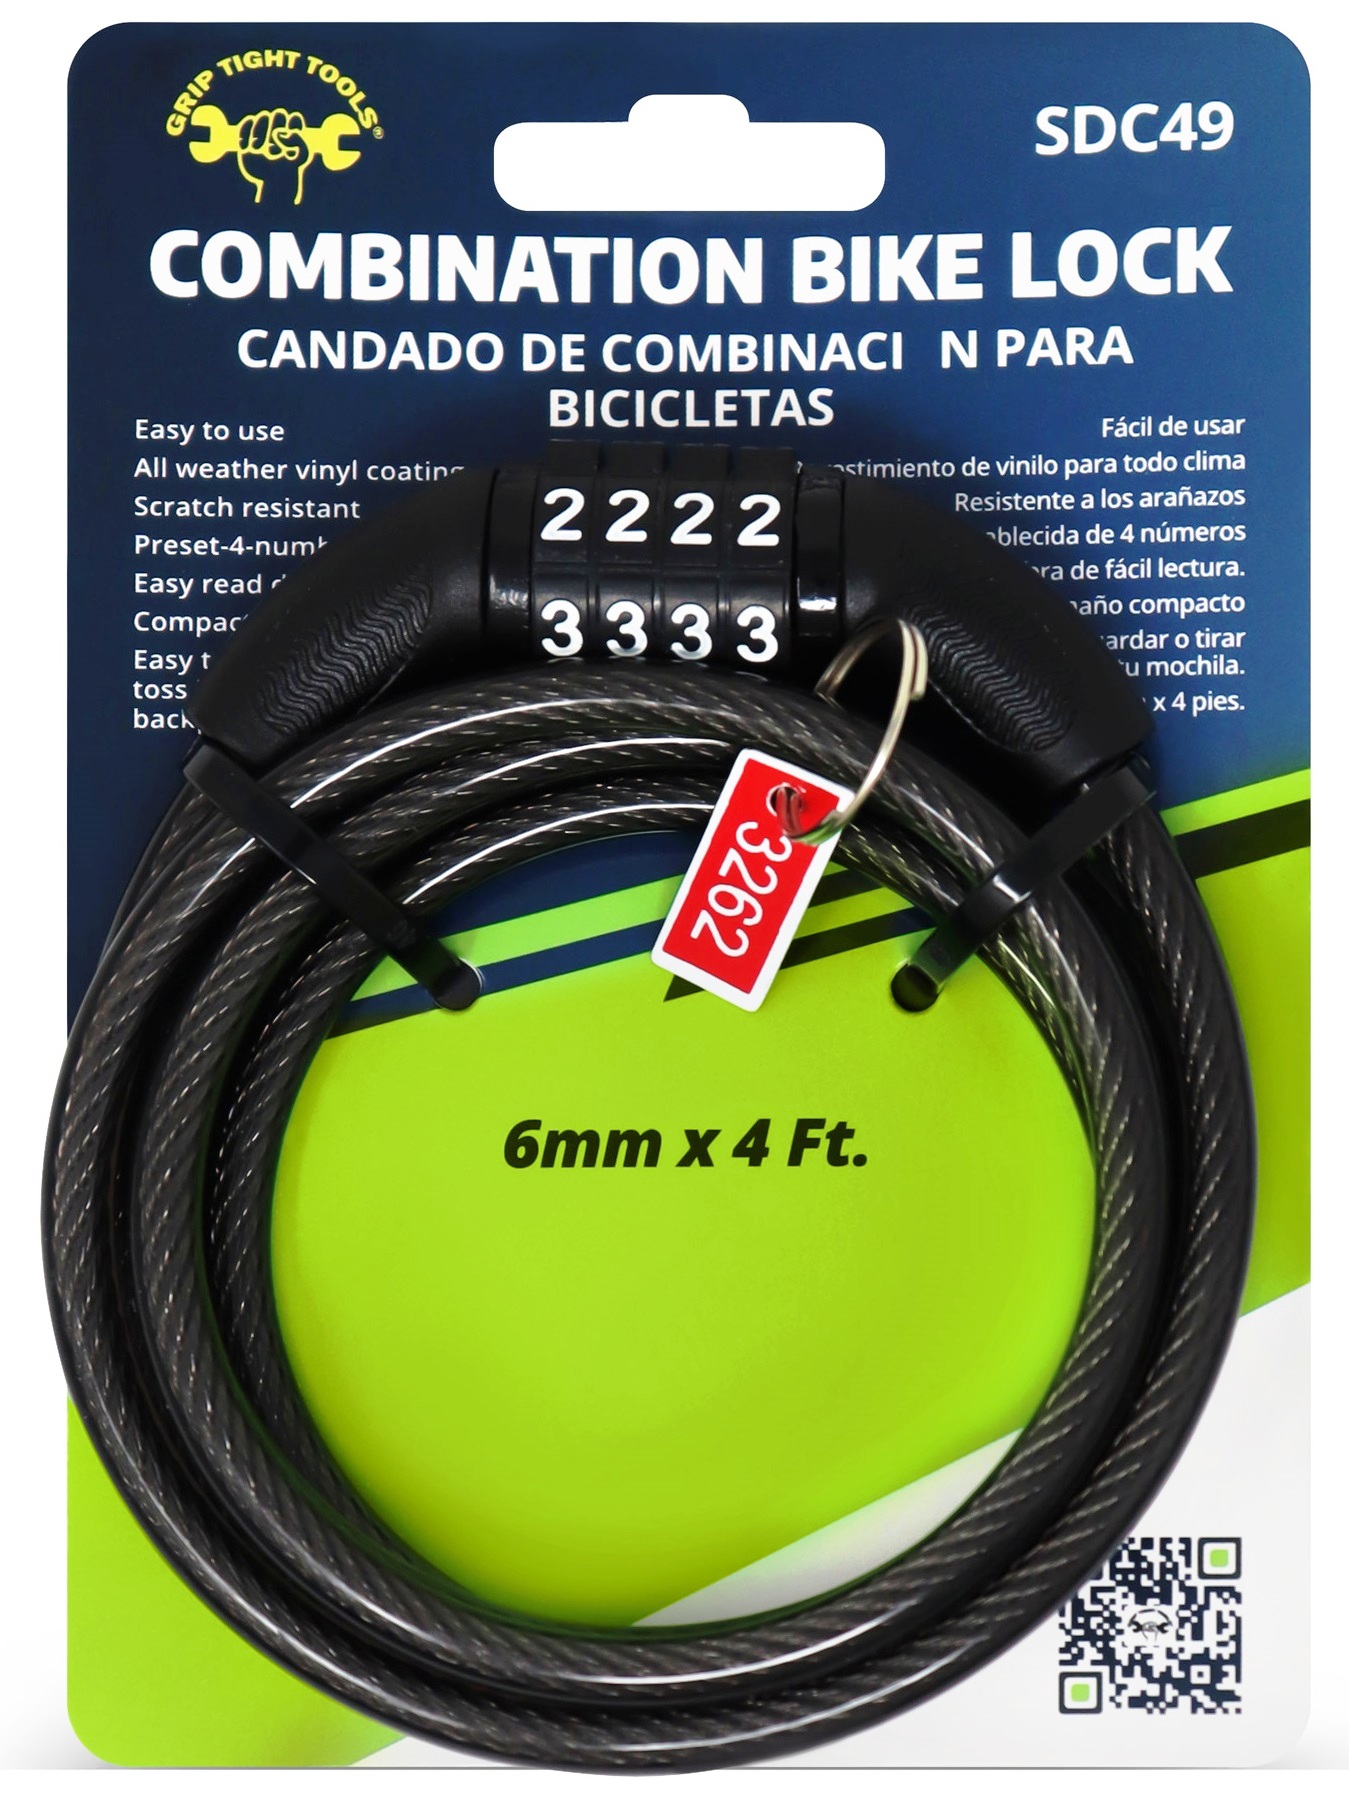 SDC49-4 ft. X 6mm Self-Coiling Cable Combination Bike Lock